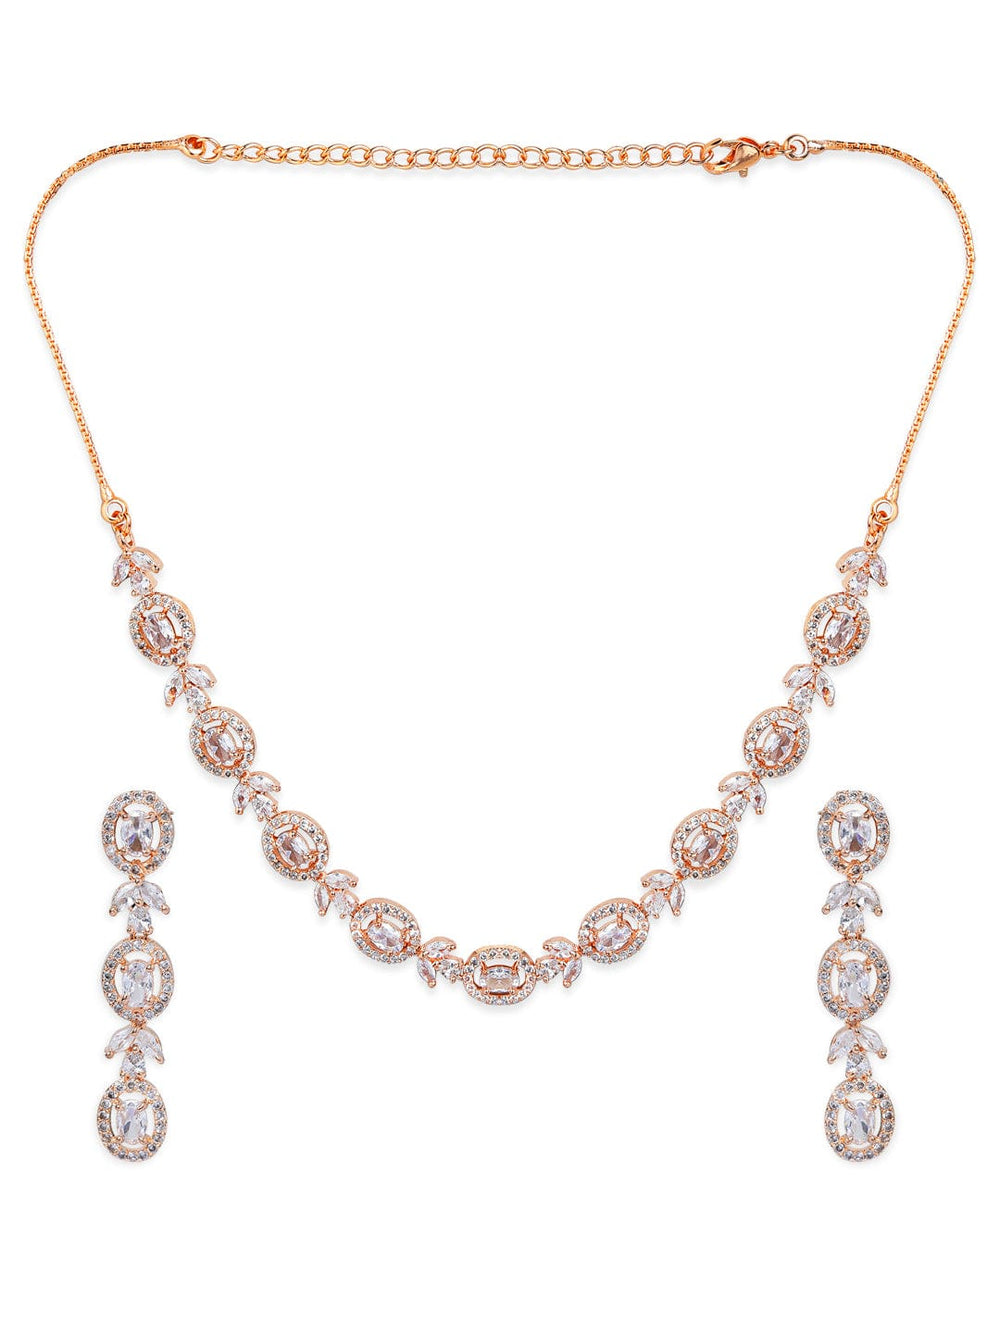 Rubans Simple Gold Toned CZ Necklace Set with Long Earrings Necklace Set